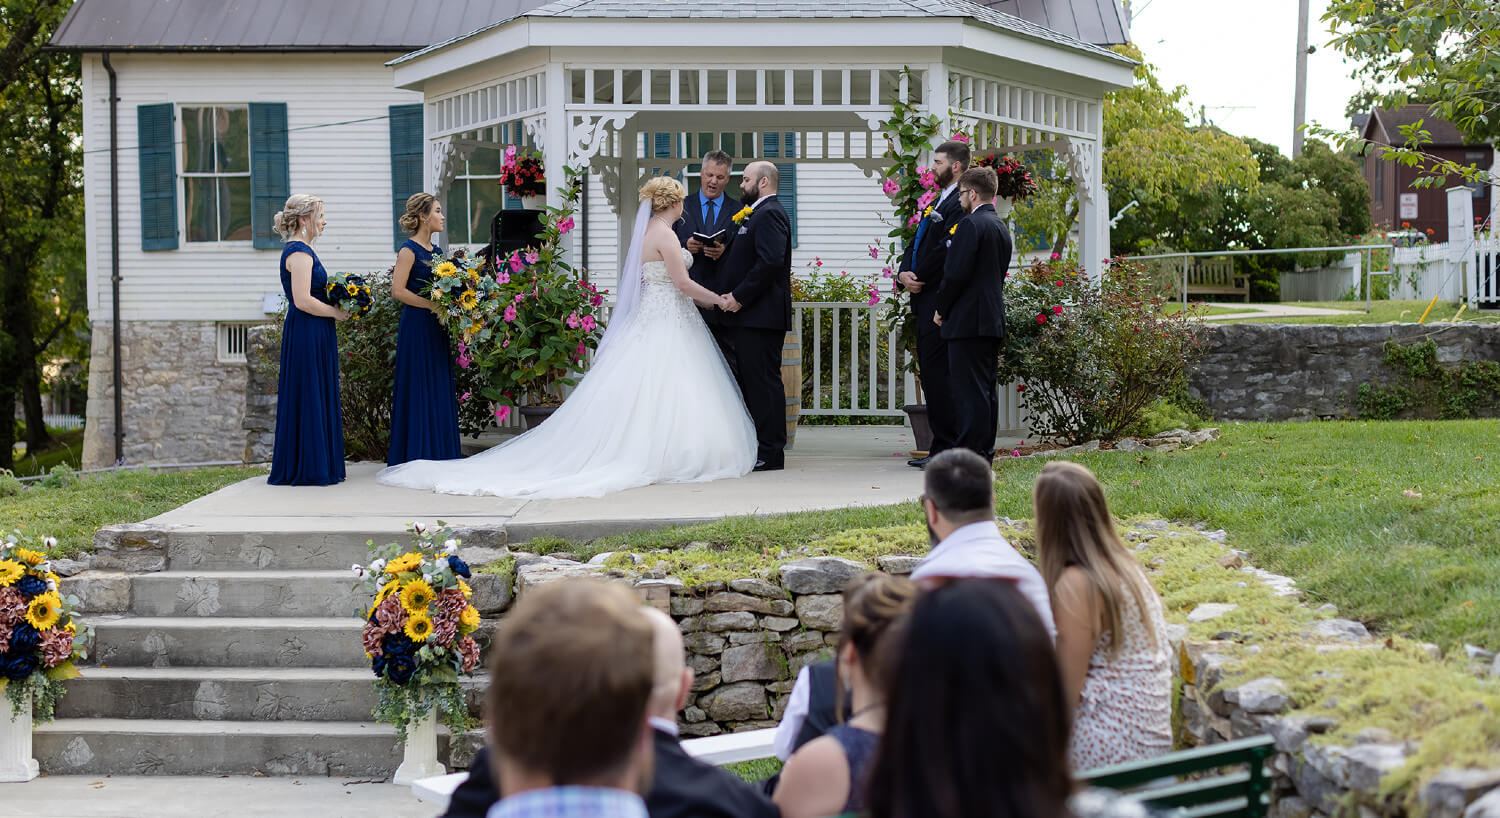 Side view of bride and groom holding hands while exchanging vows by white gazebo with wedding party and guests observing.